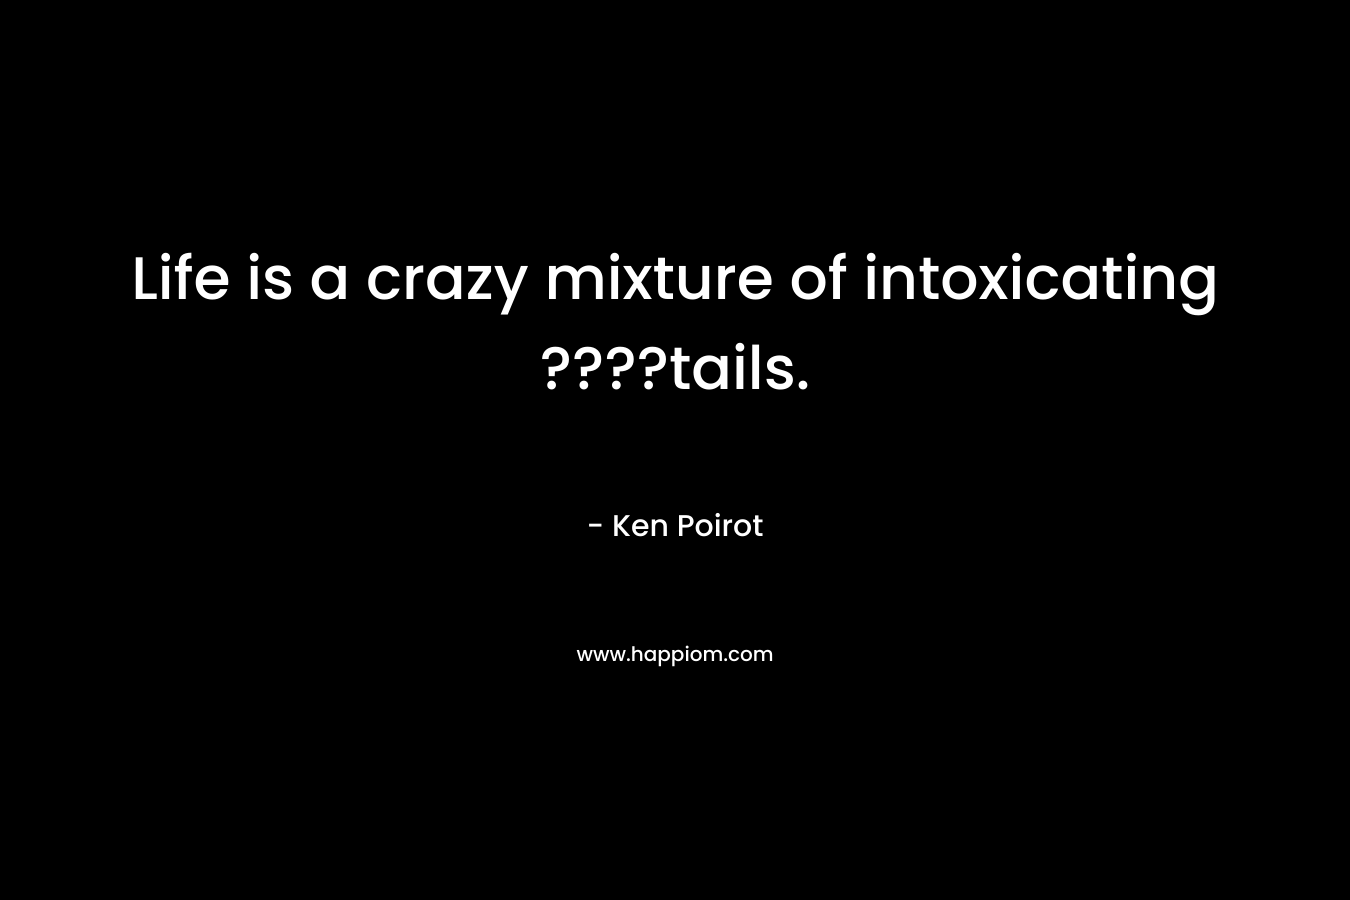 Life is a crazy mixture of intoxicating ????tails. – Ken Poirot